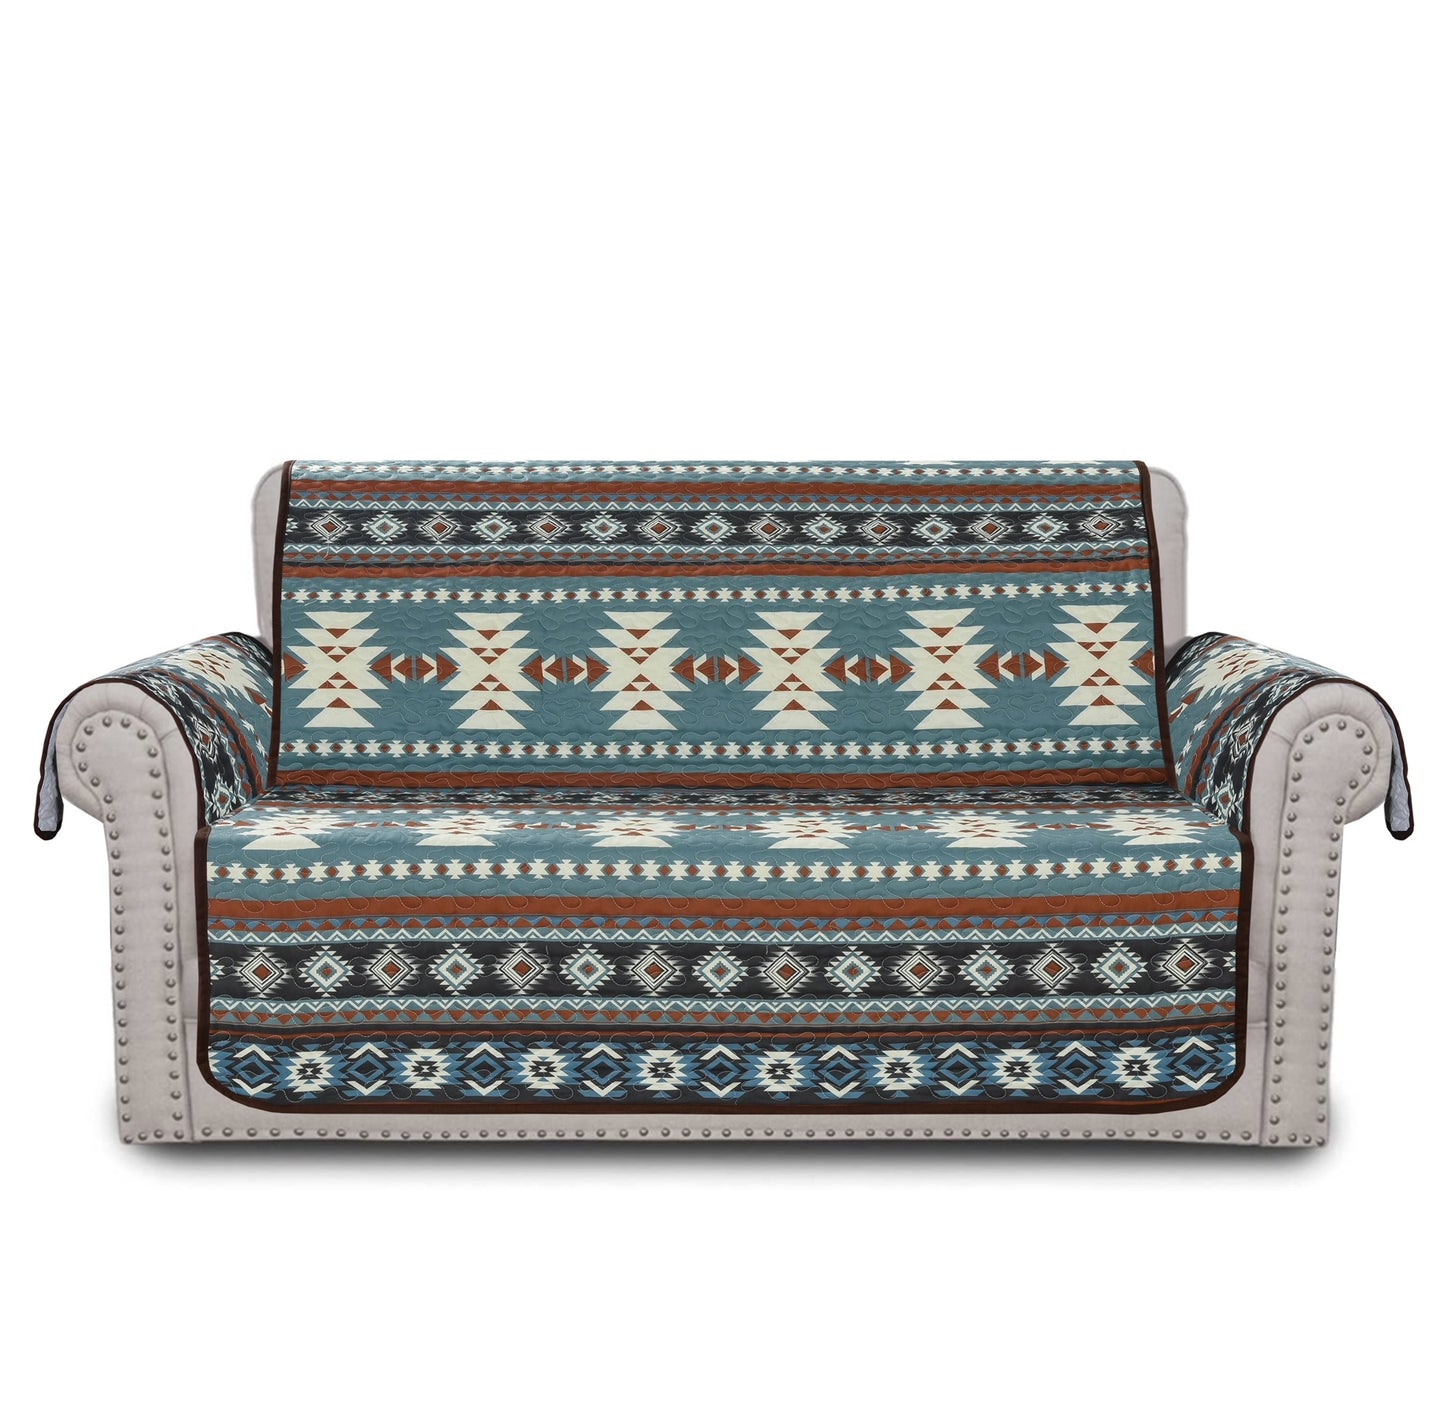 Love Seat Cover